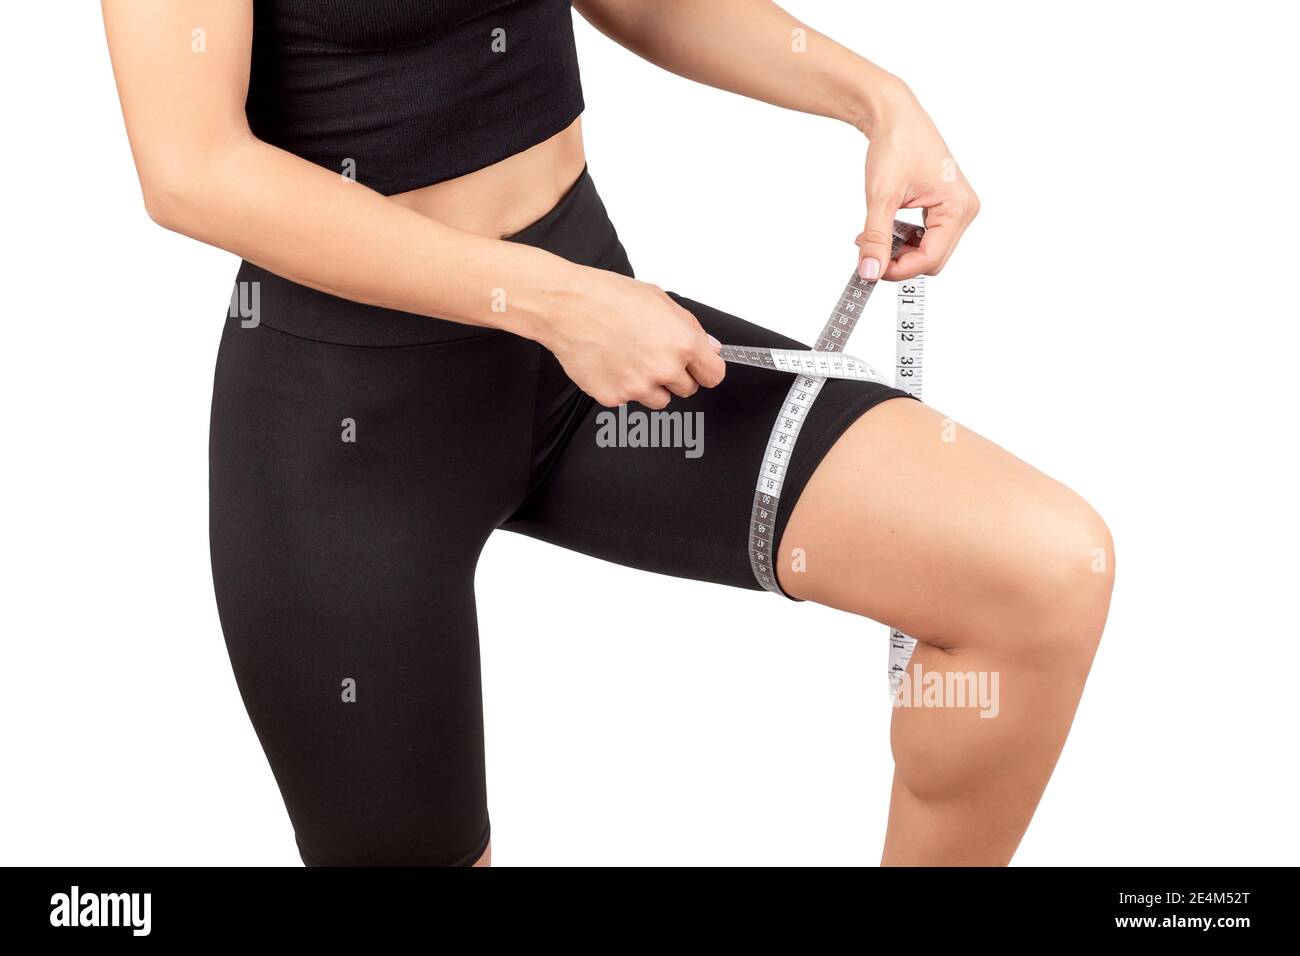 young beautiful woman in black leggings and top doing sports and yoga indoors, on a white background, isolate Stock Photo